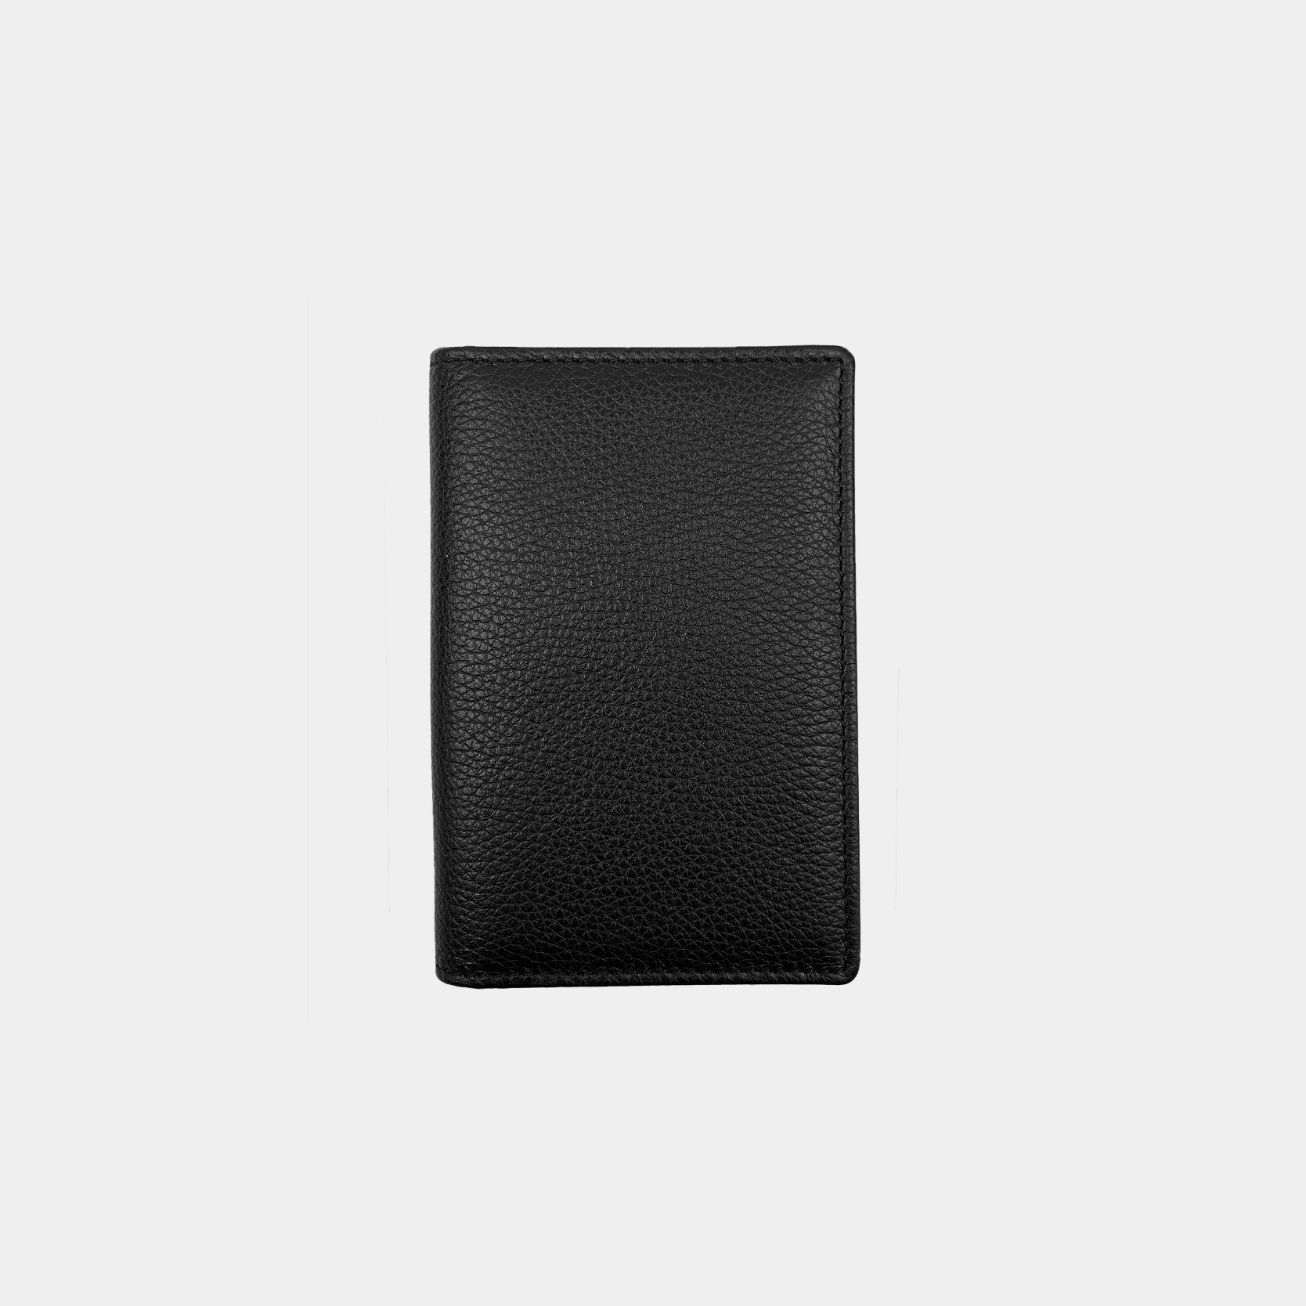 Leather card wallet for all your essential day to day cards. Brand this card wallet with your company logo.